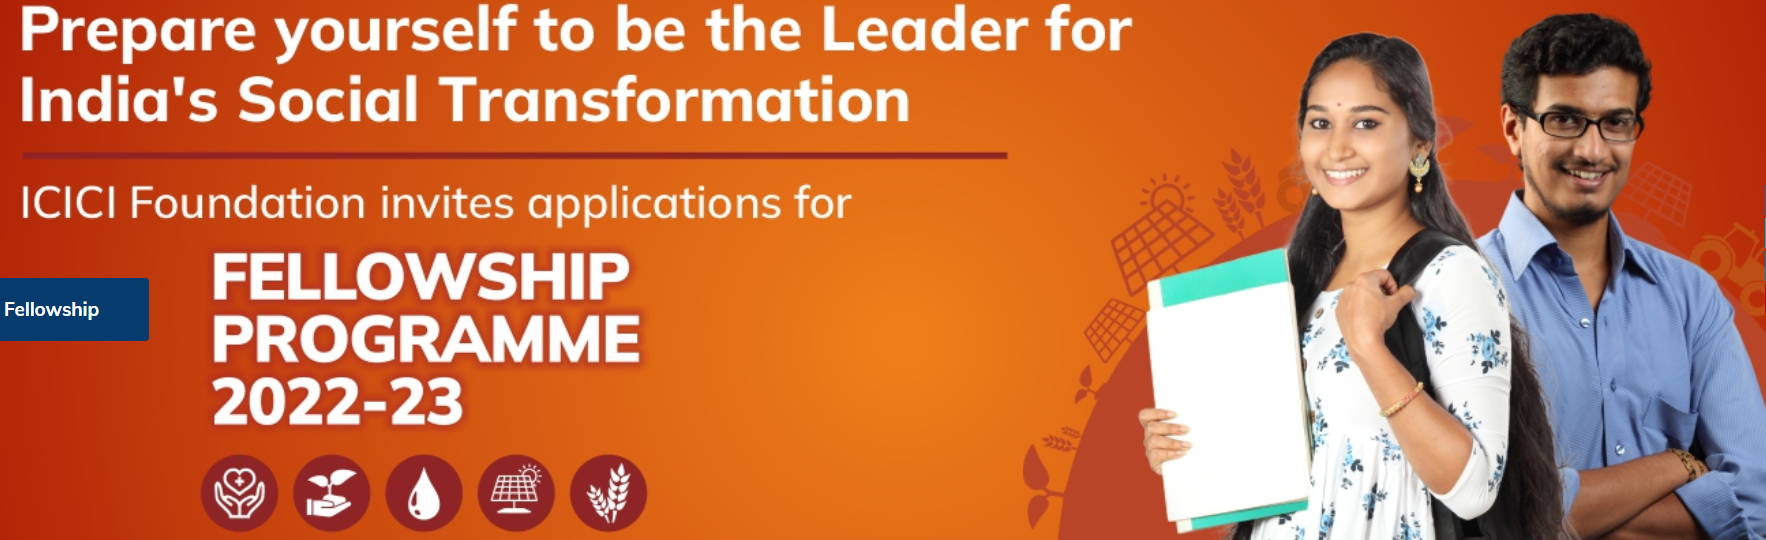 ICICI Foundation Fellowship Programme 2022-23 - DevInfo.in